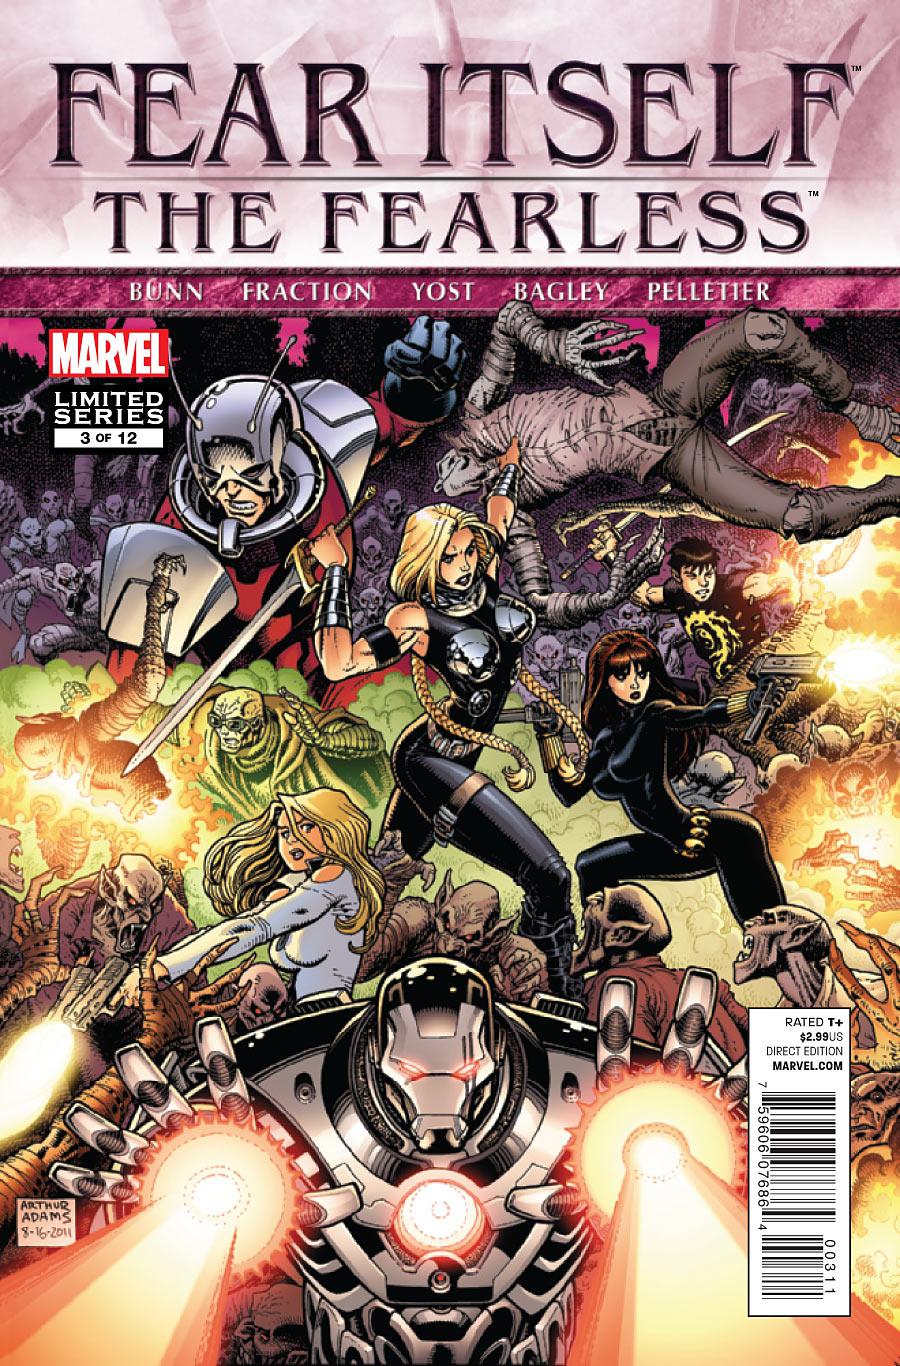 Fear Itself: The Fearless Vol. 1 #3